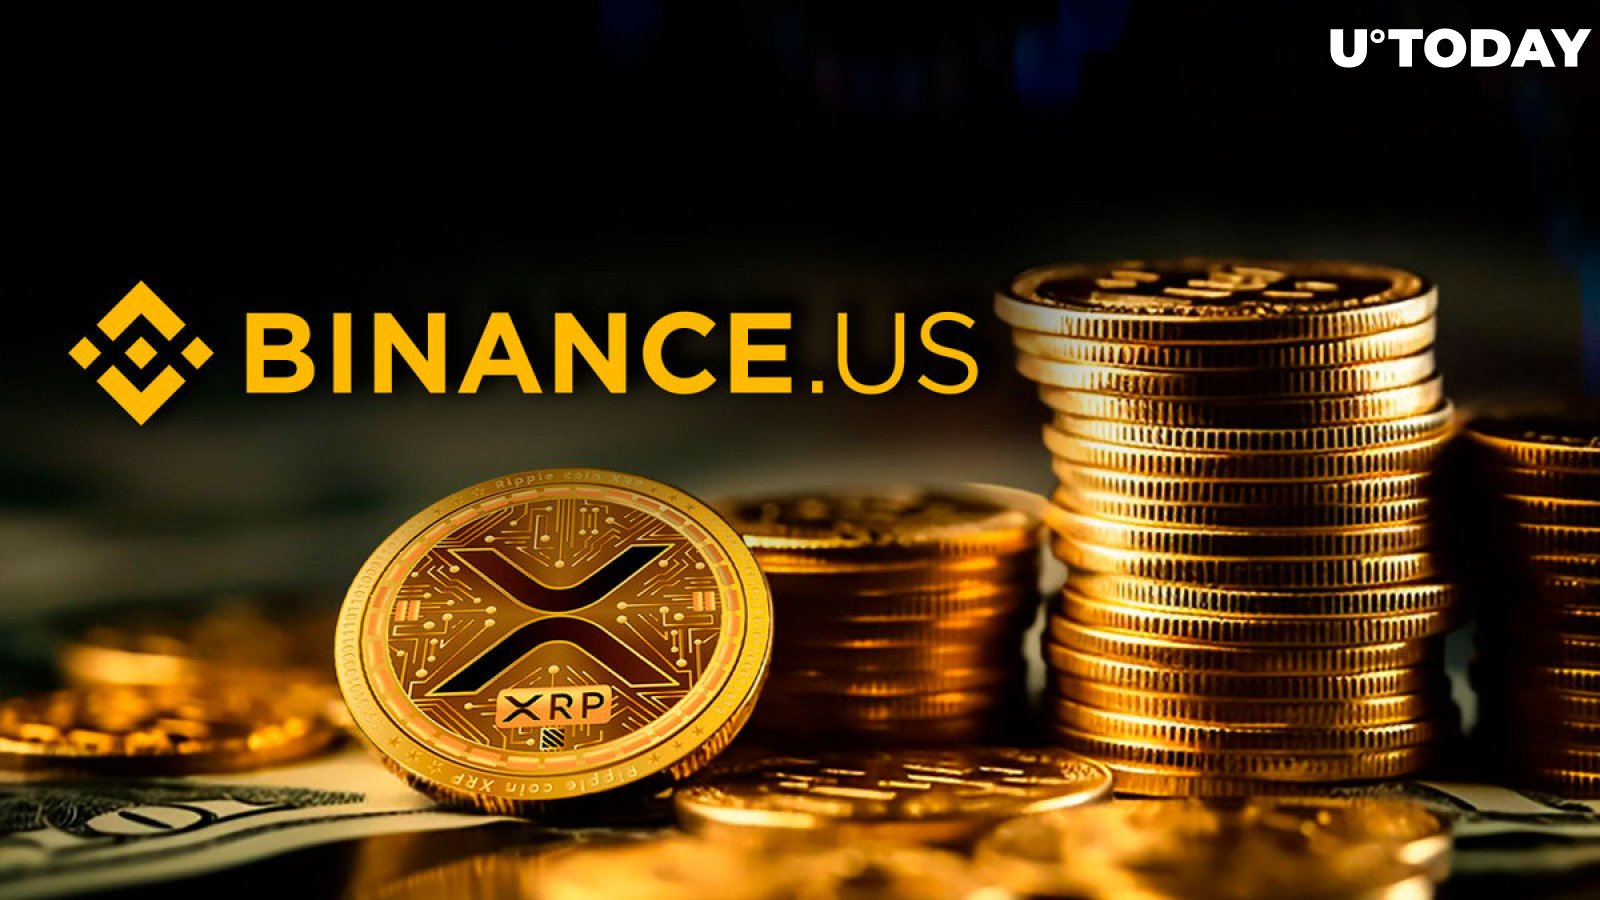 XRP: Binance US Shares Important Update for XRP Holders